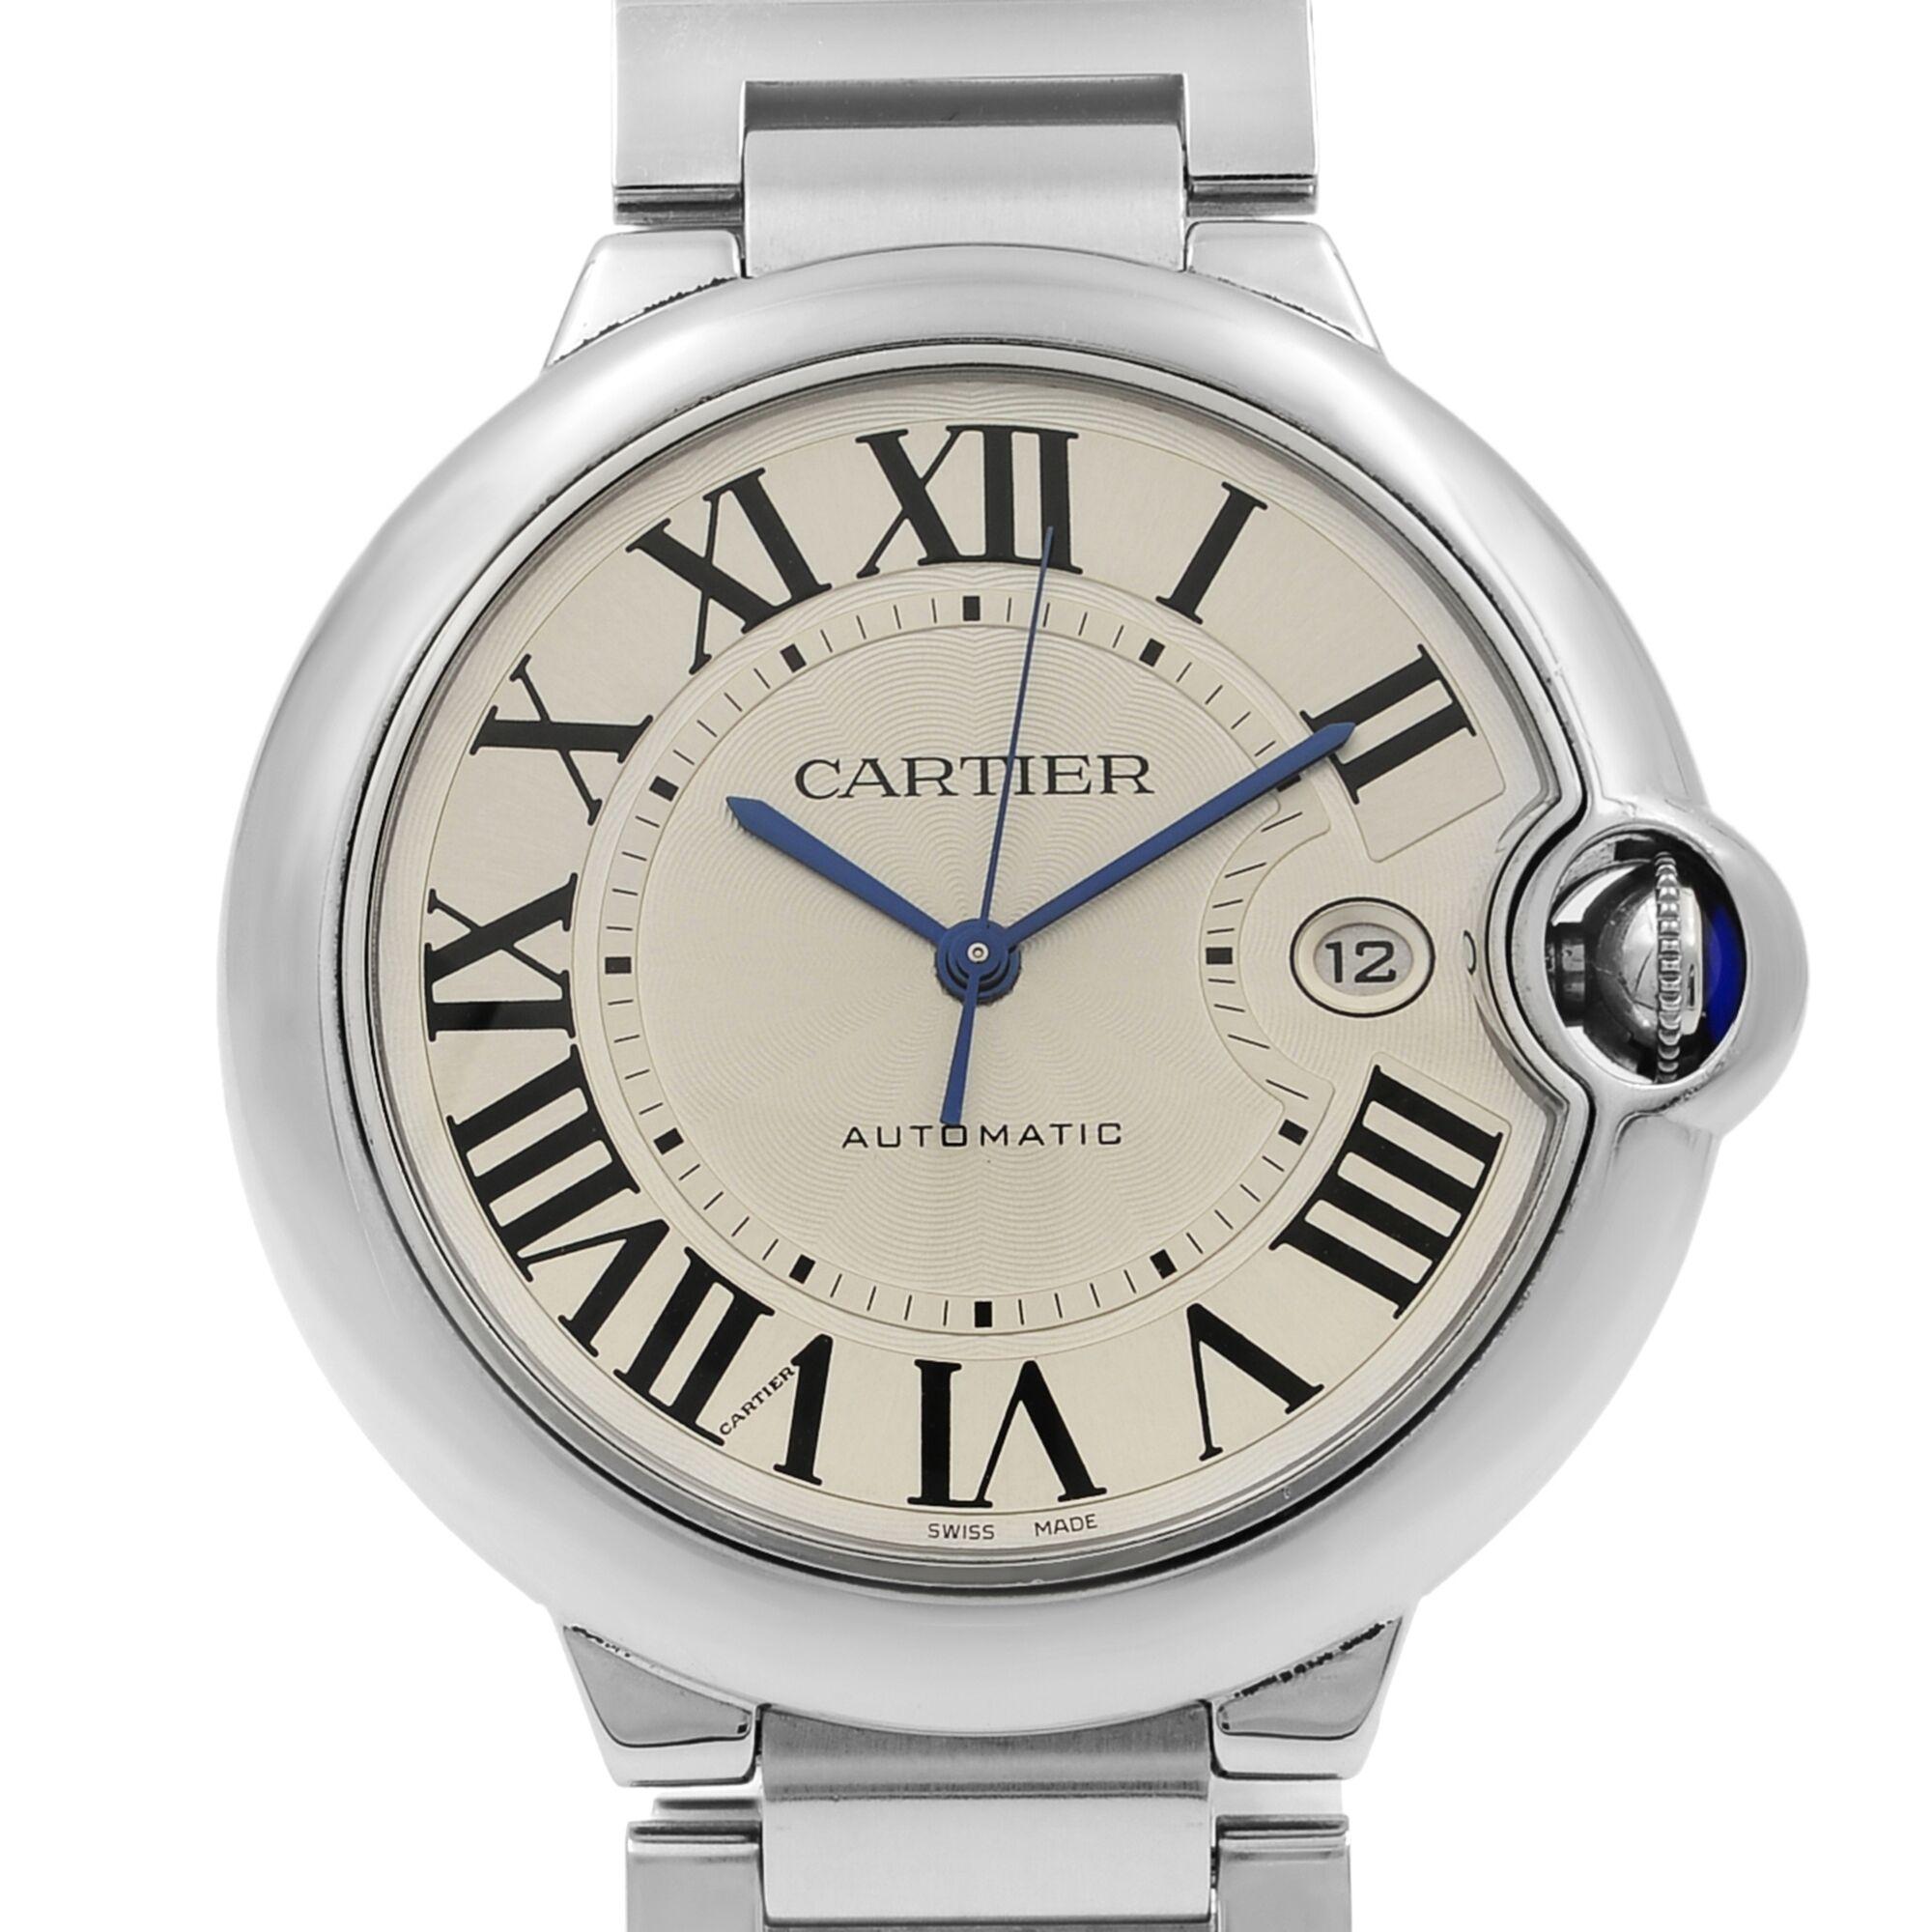 This pre-owned Cartier Ballon Bleu W69012Z4 is a beautiful men's timepiece that is powered by an automatic movement which is cased in a stainless steel case. It has a round shape face, date dial and has hand roman numerals style markers. It is